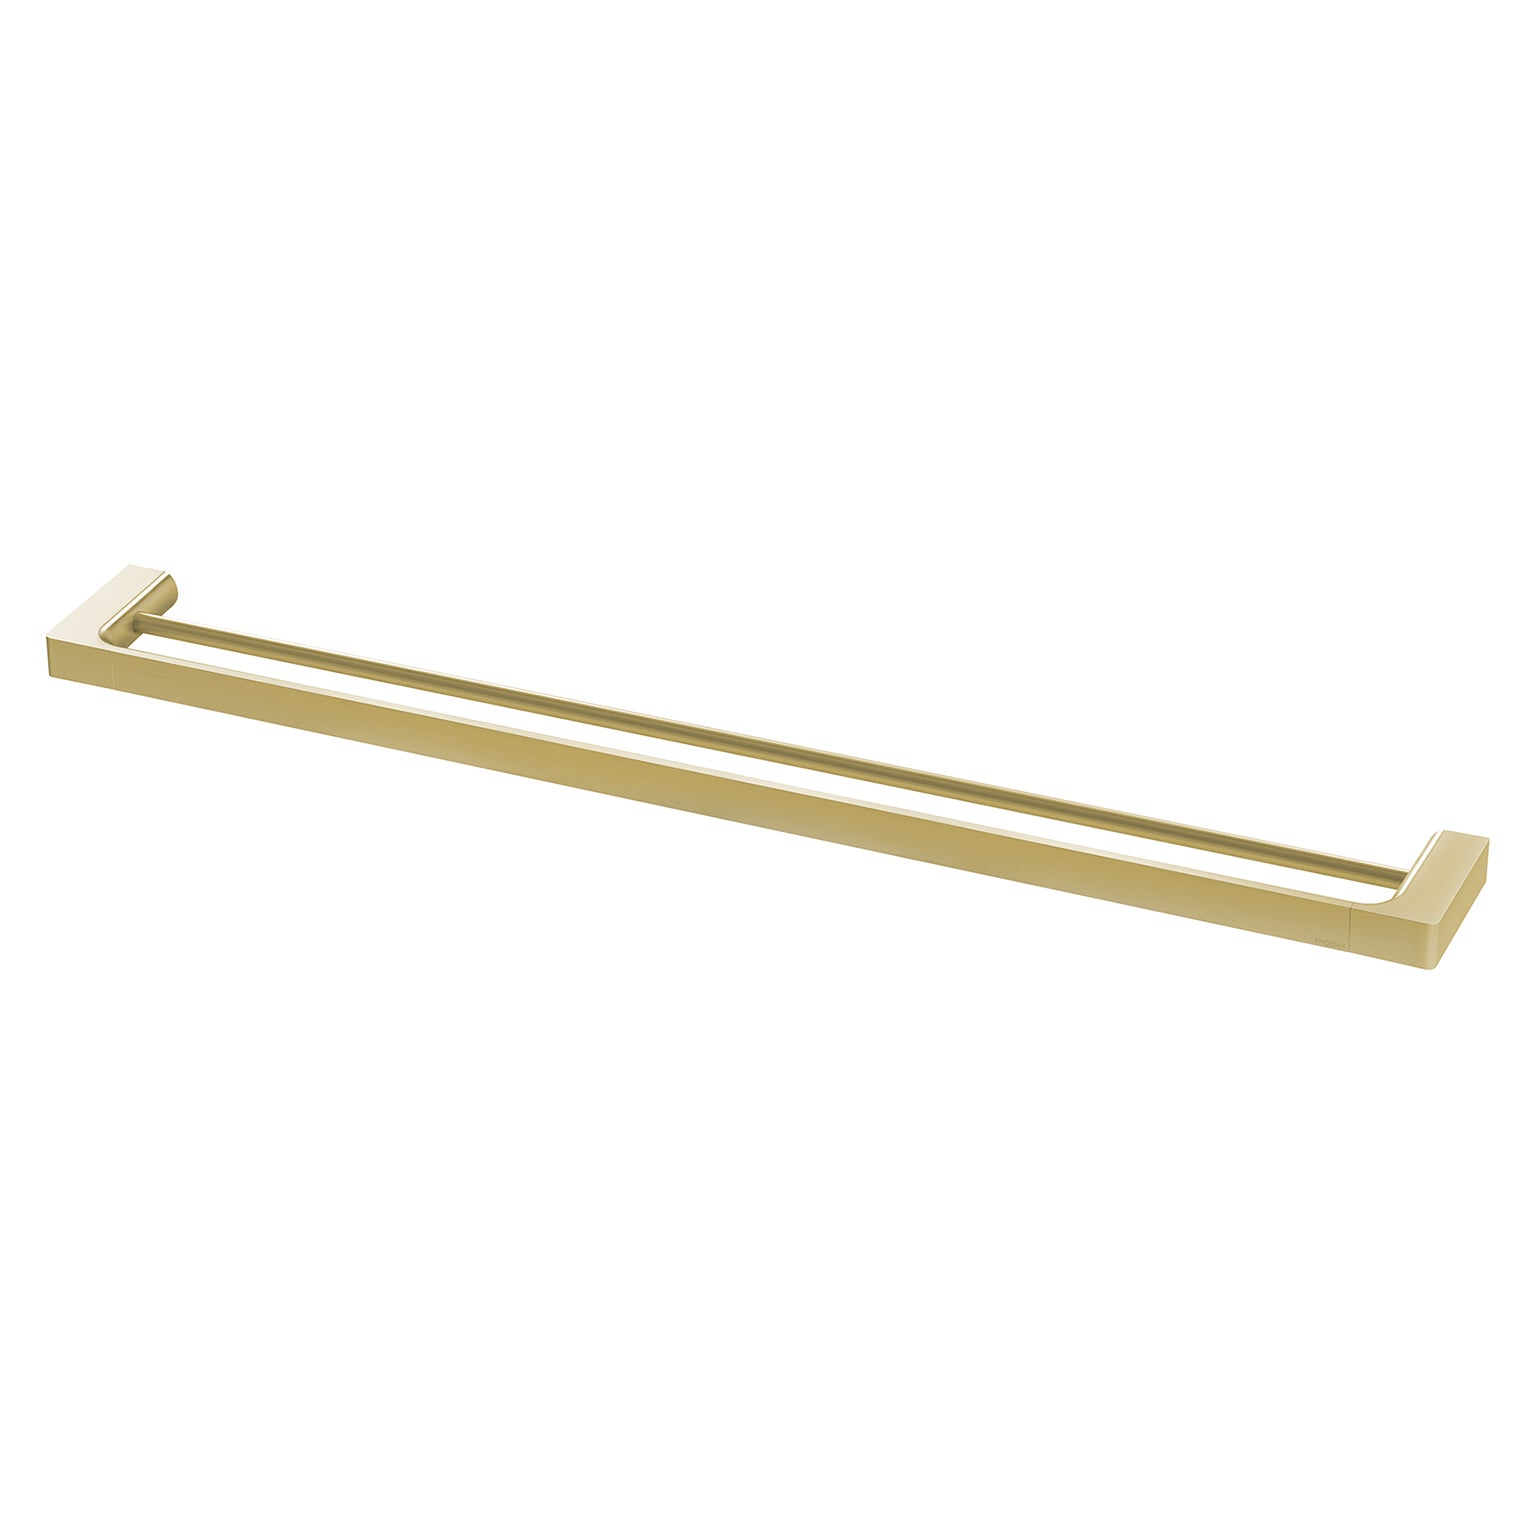 PHOENIX GLOSS DOUBLE NON-HEATED TOWEL RAIL BRUSHED GOLD 800MM